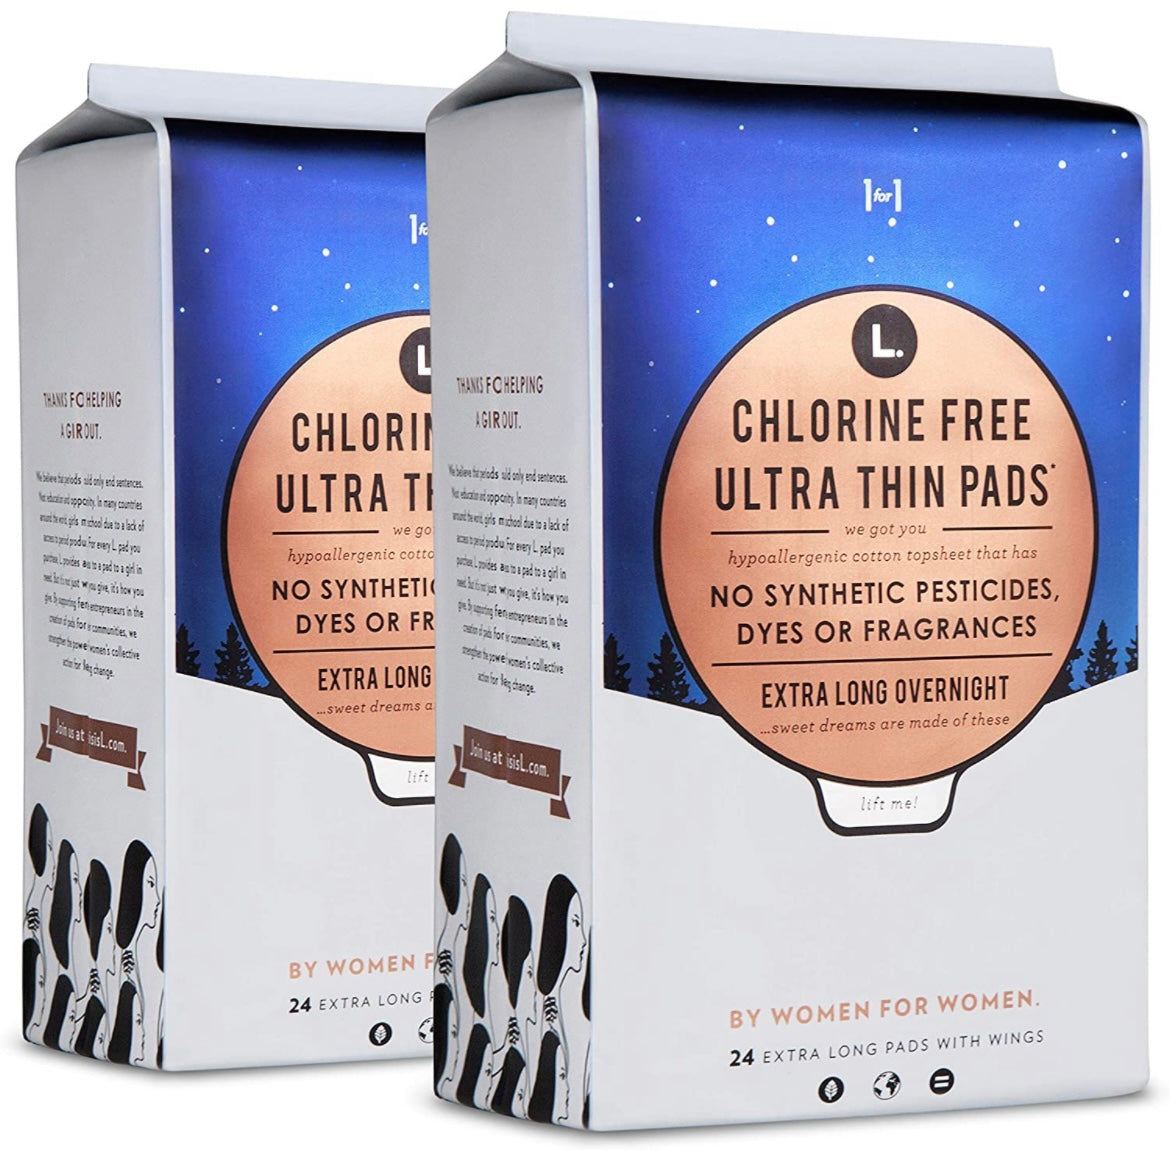 L. Chlorine Free Ultra Thin Pads with Wings